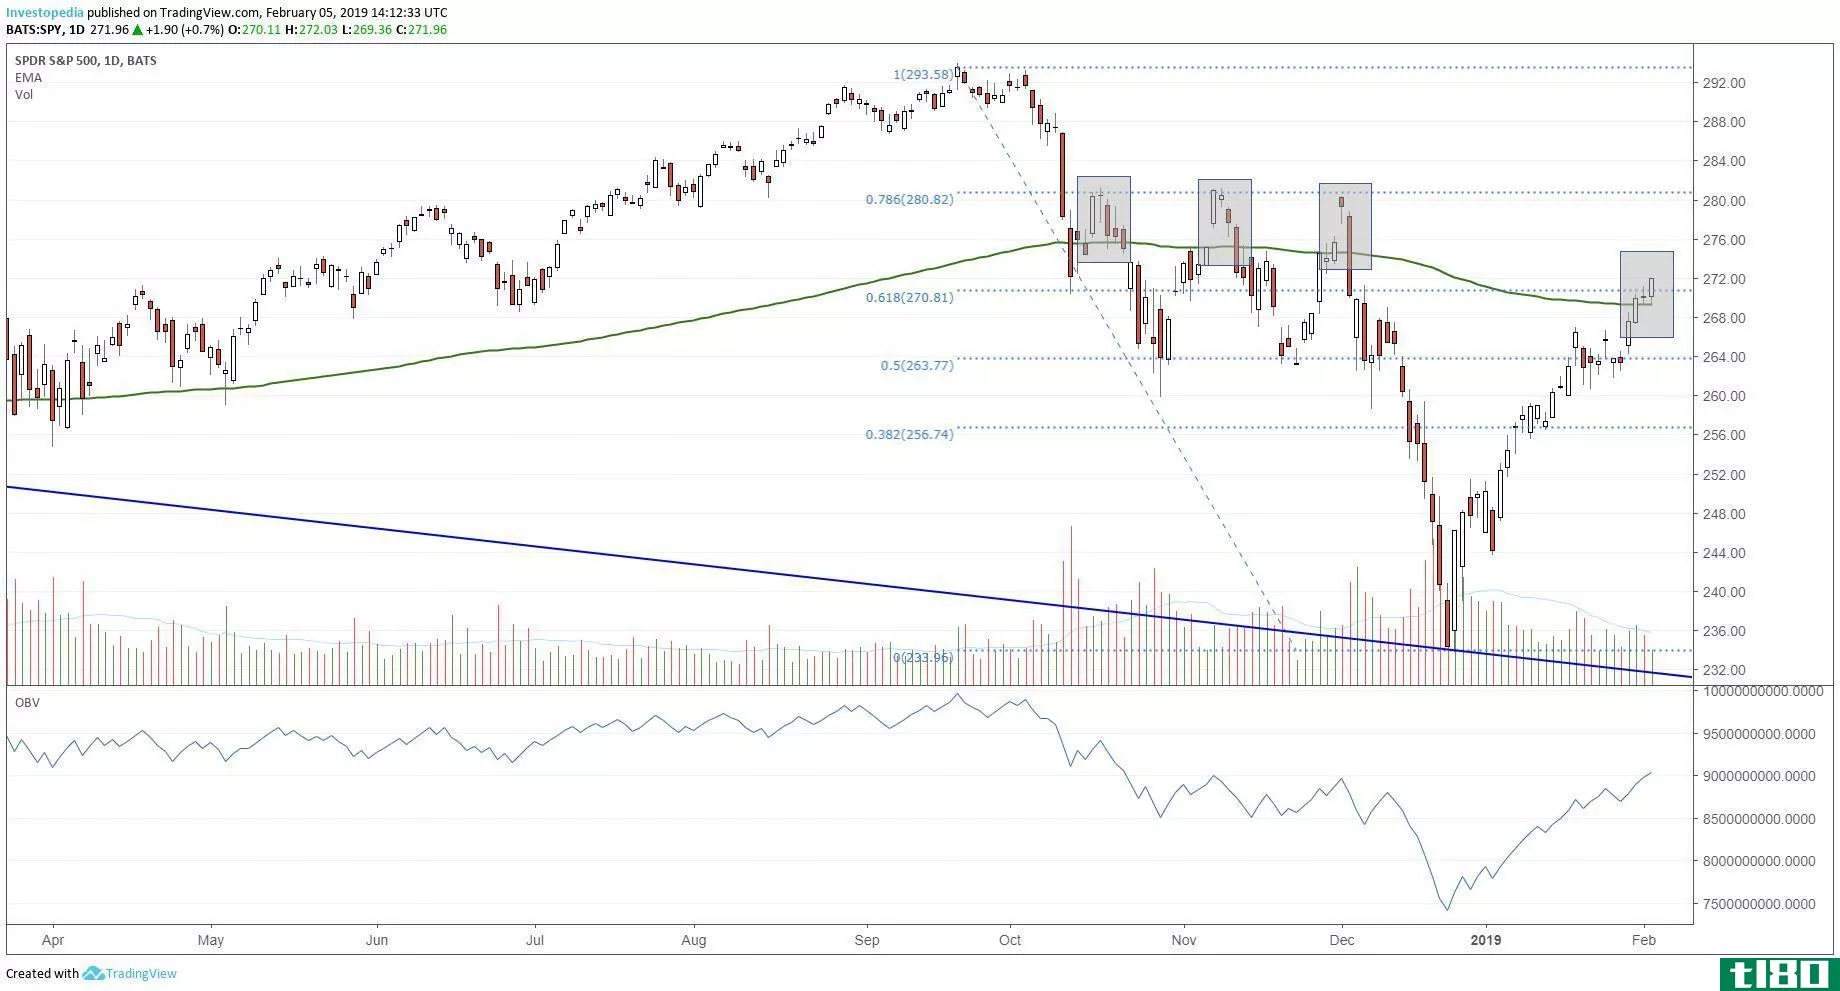 Technical chart showing the share price performance of the SPDR S&P500 ETF (SPY)